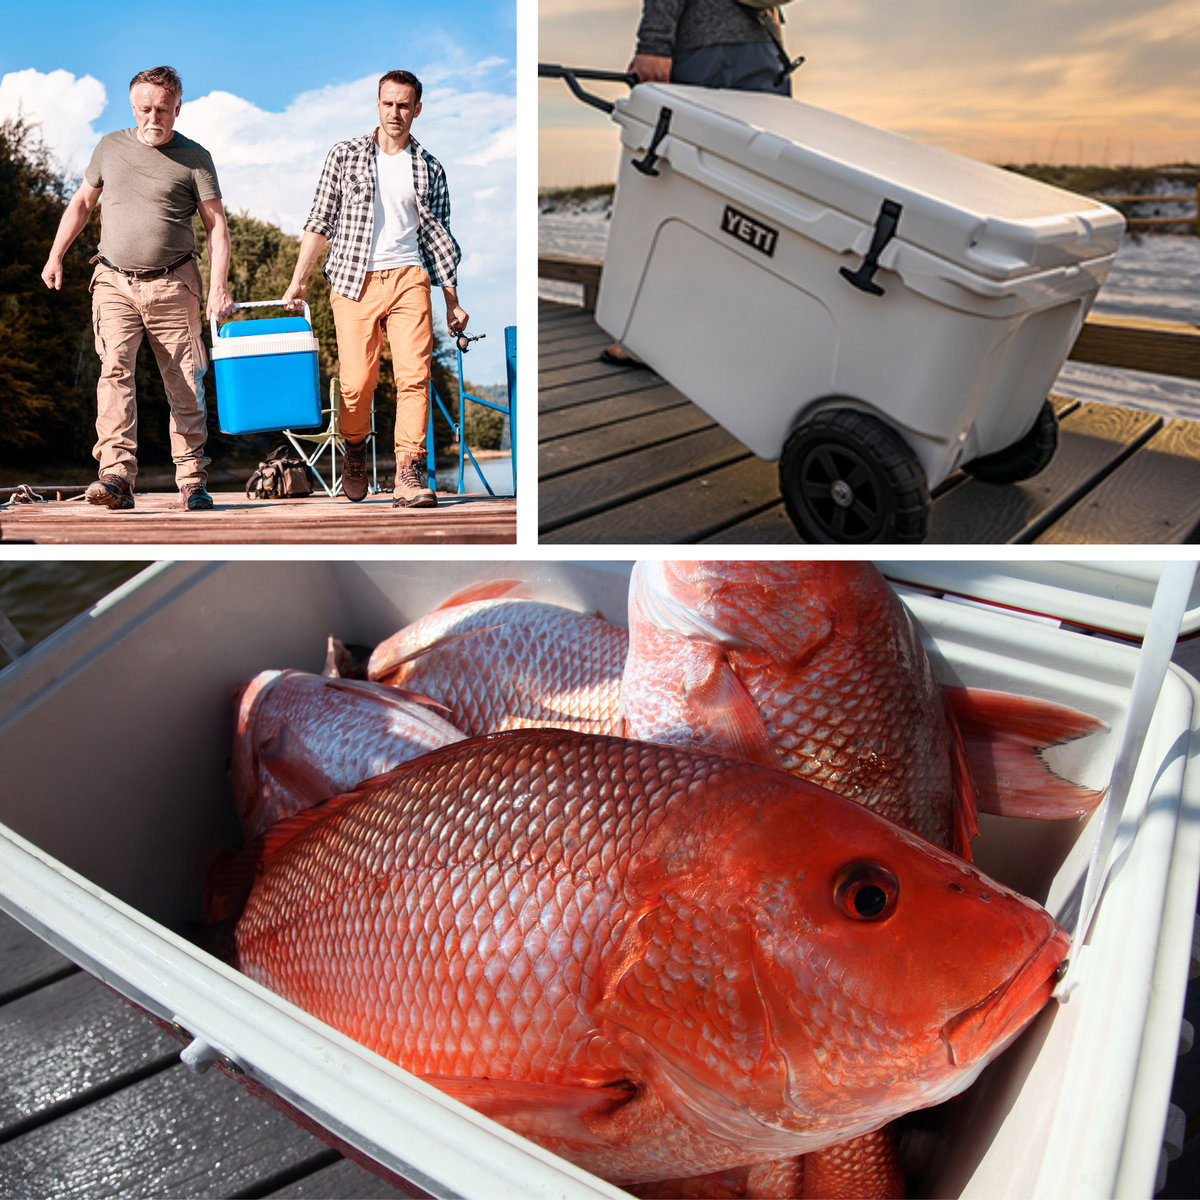 Men on dock with cooler, man with kayak and cooler, fish in marine cooler